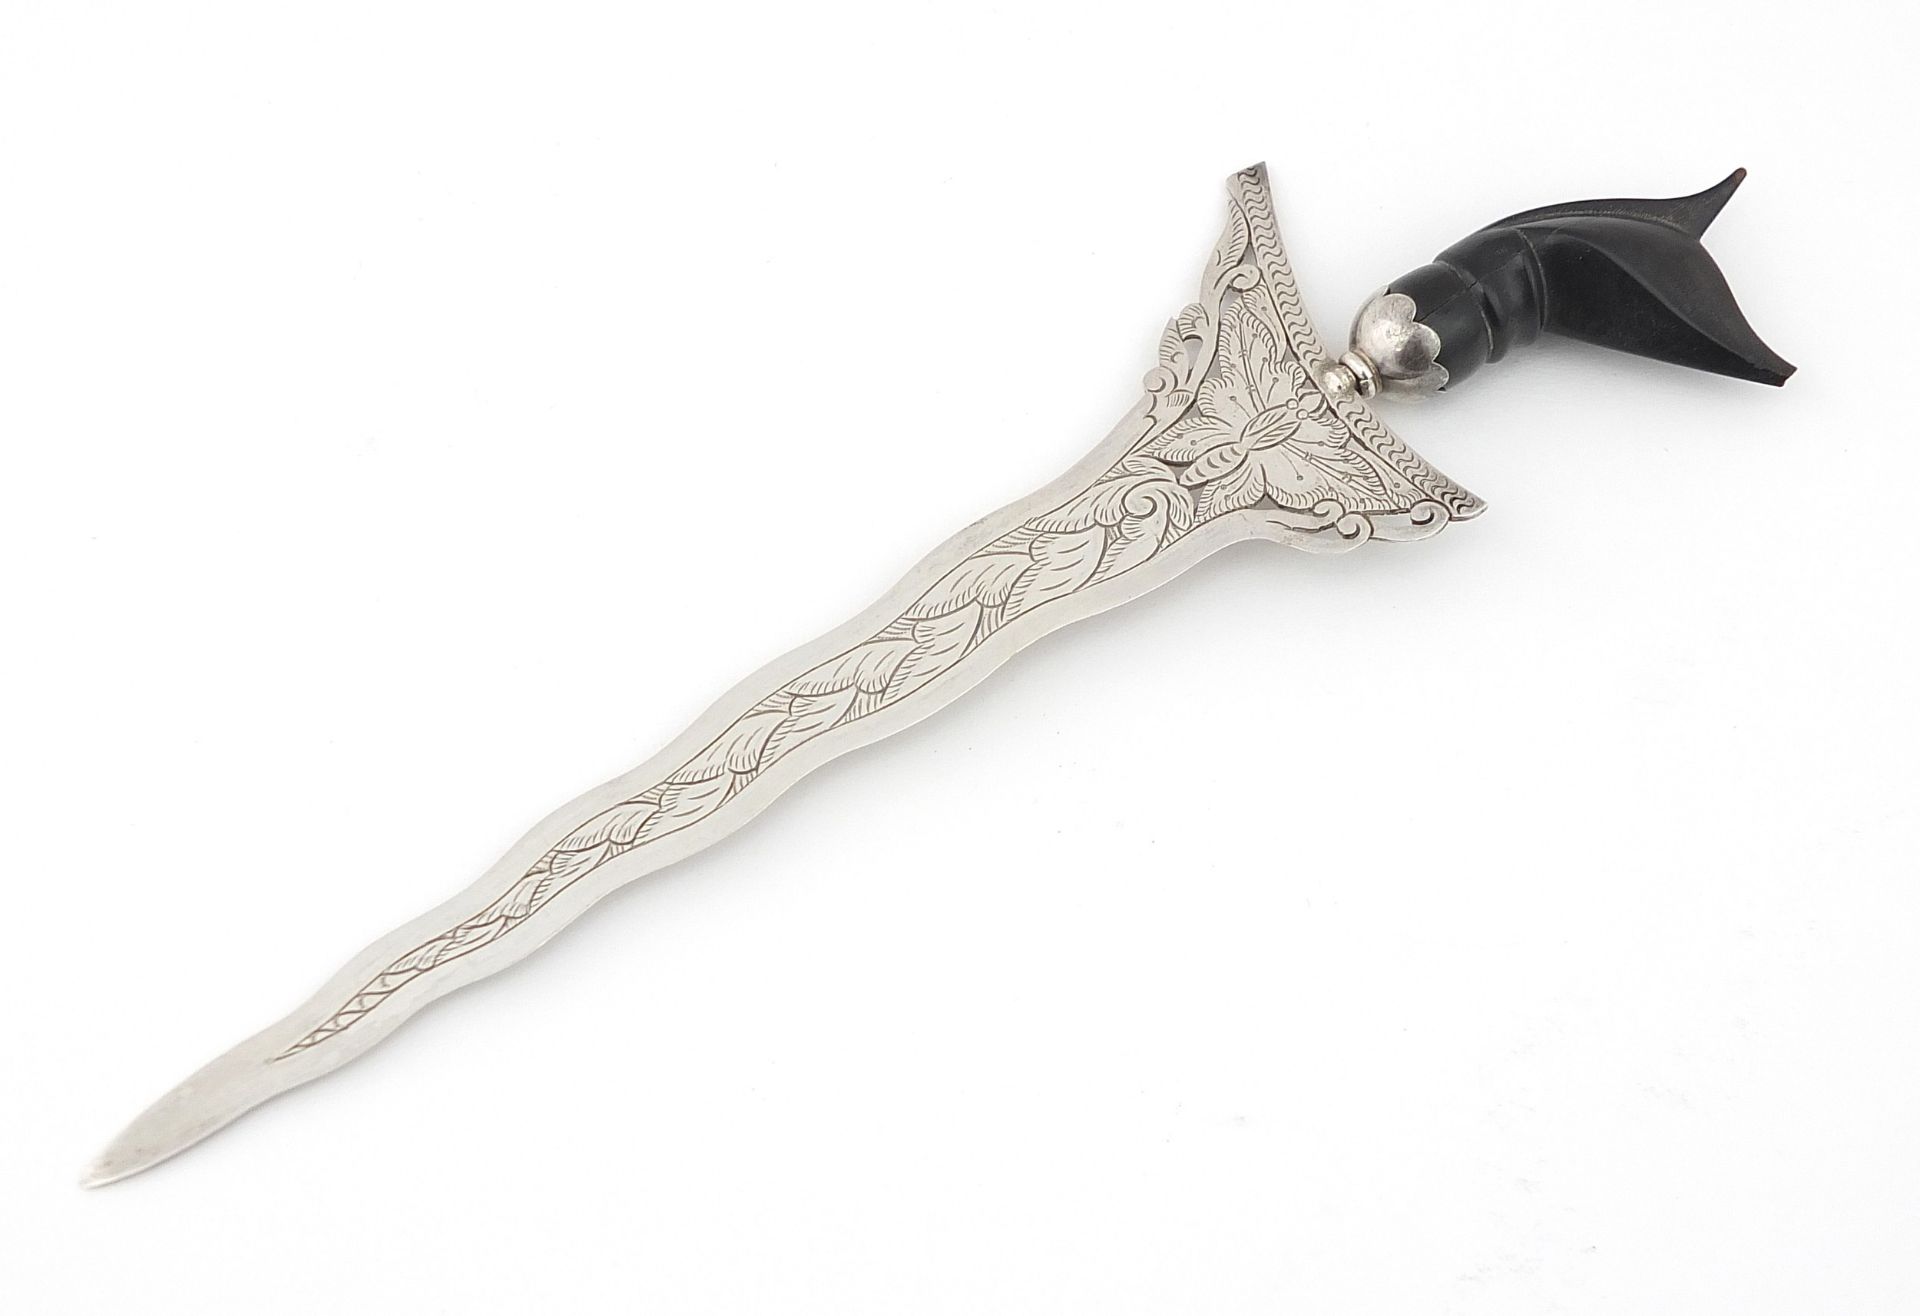 Miniature Malaysian silver Kris with ebonised handle, engraved Malaysia 1260B, 20cm in length, 27.7g